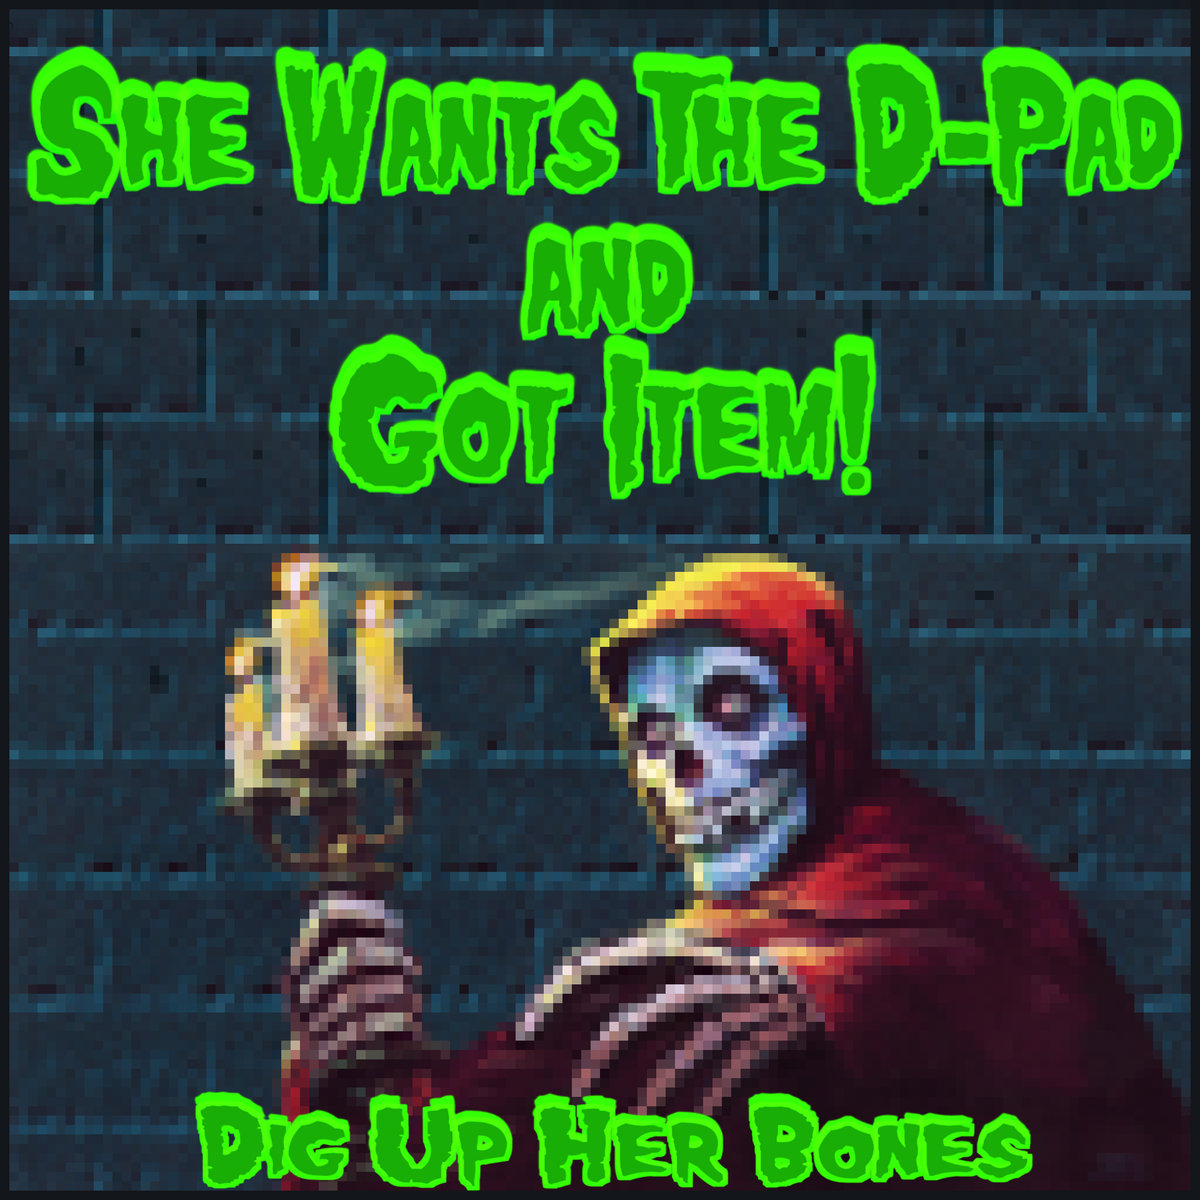 GOT ITEM! - Dig Up Her Bones (with She Wants The D-Pad) cover 